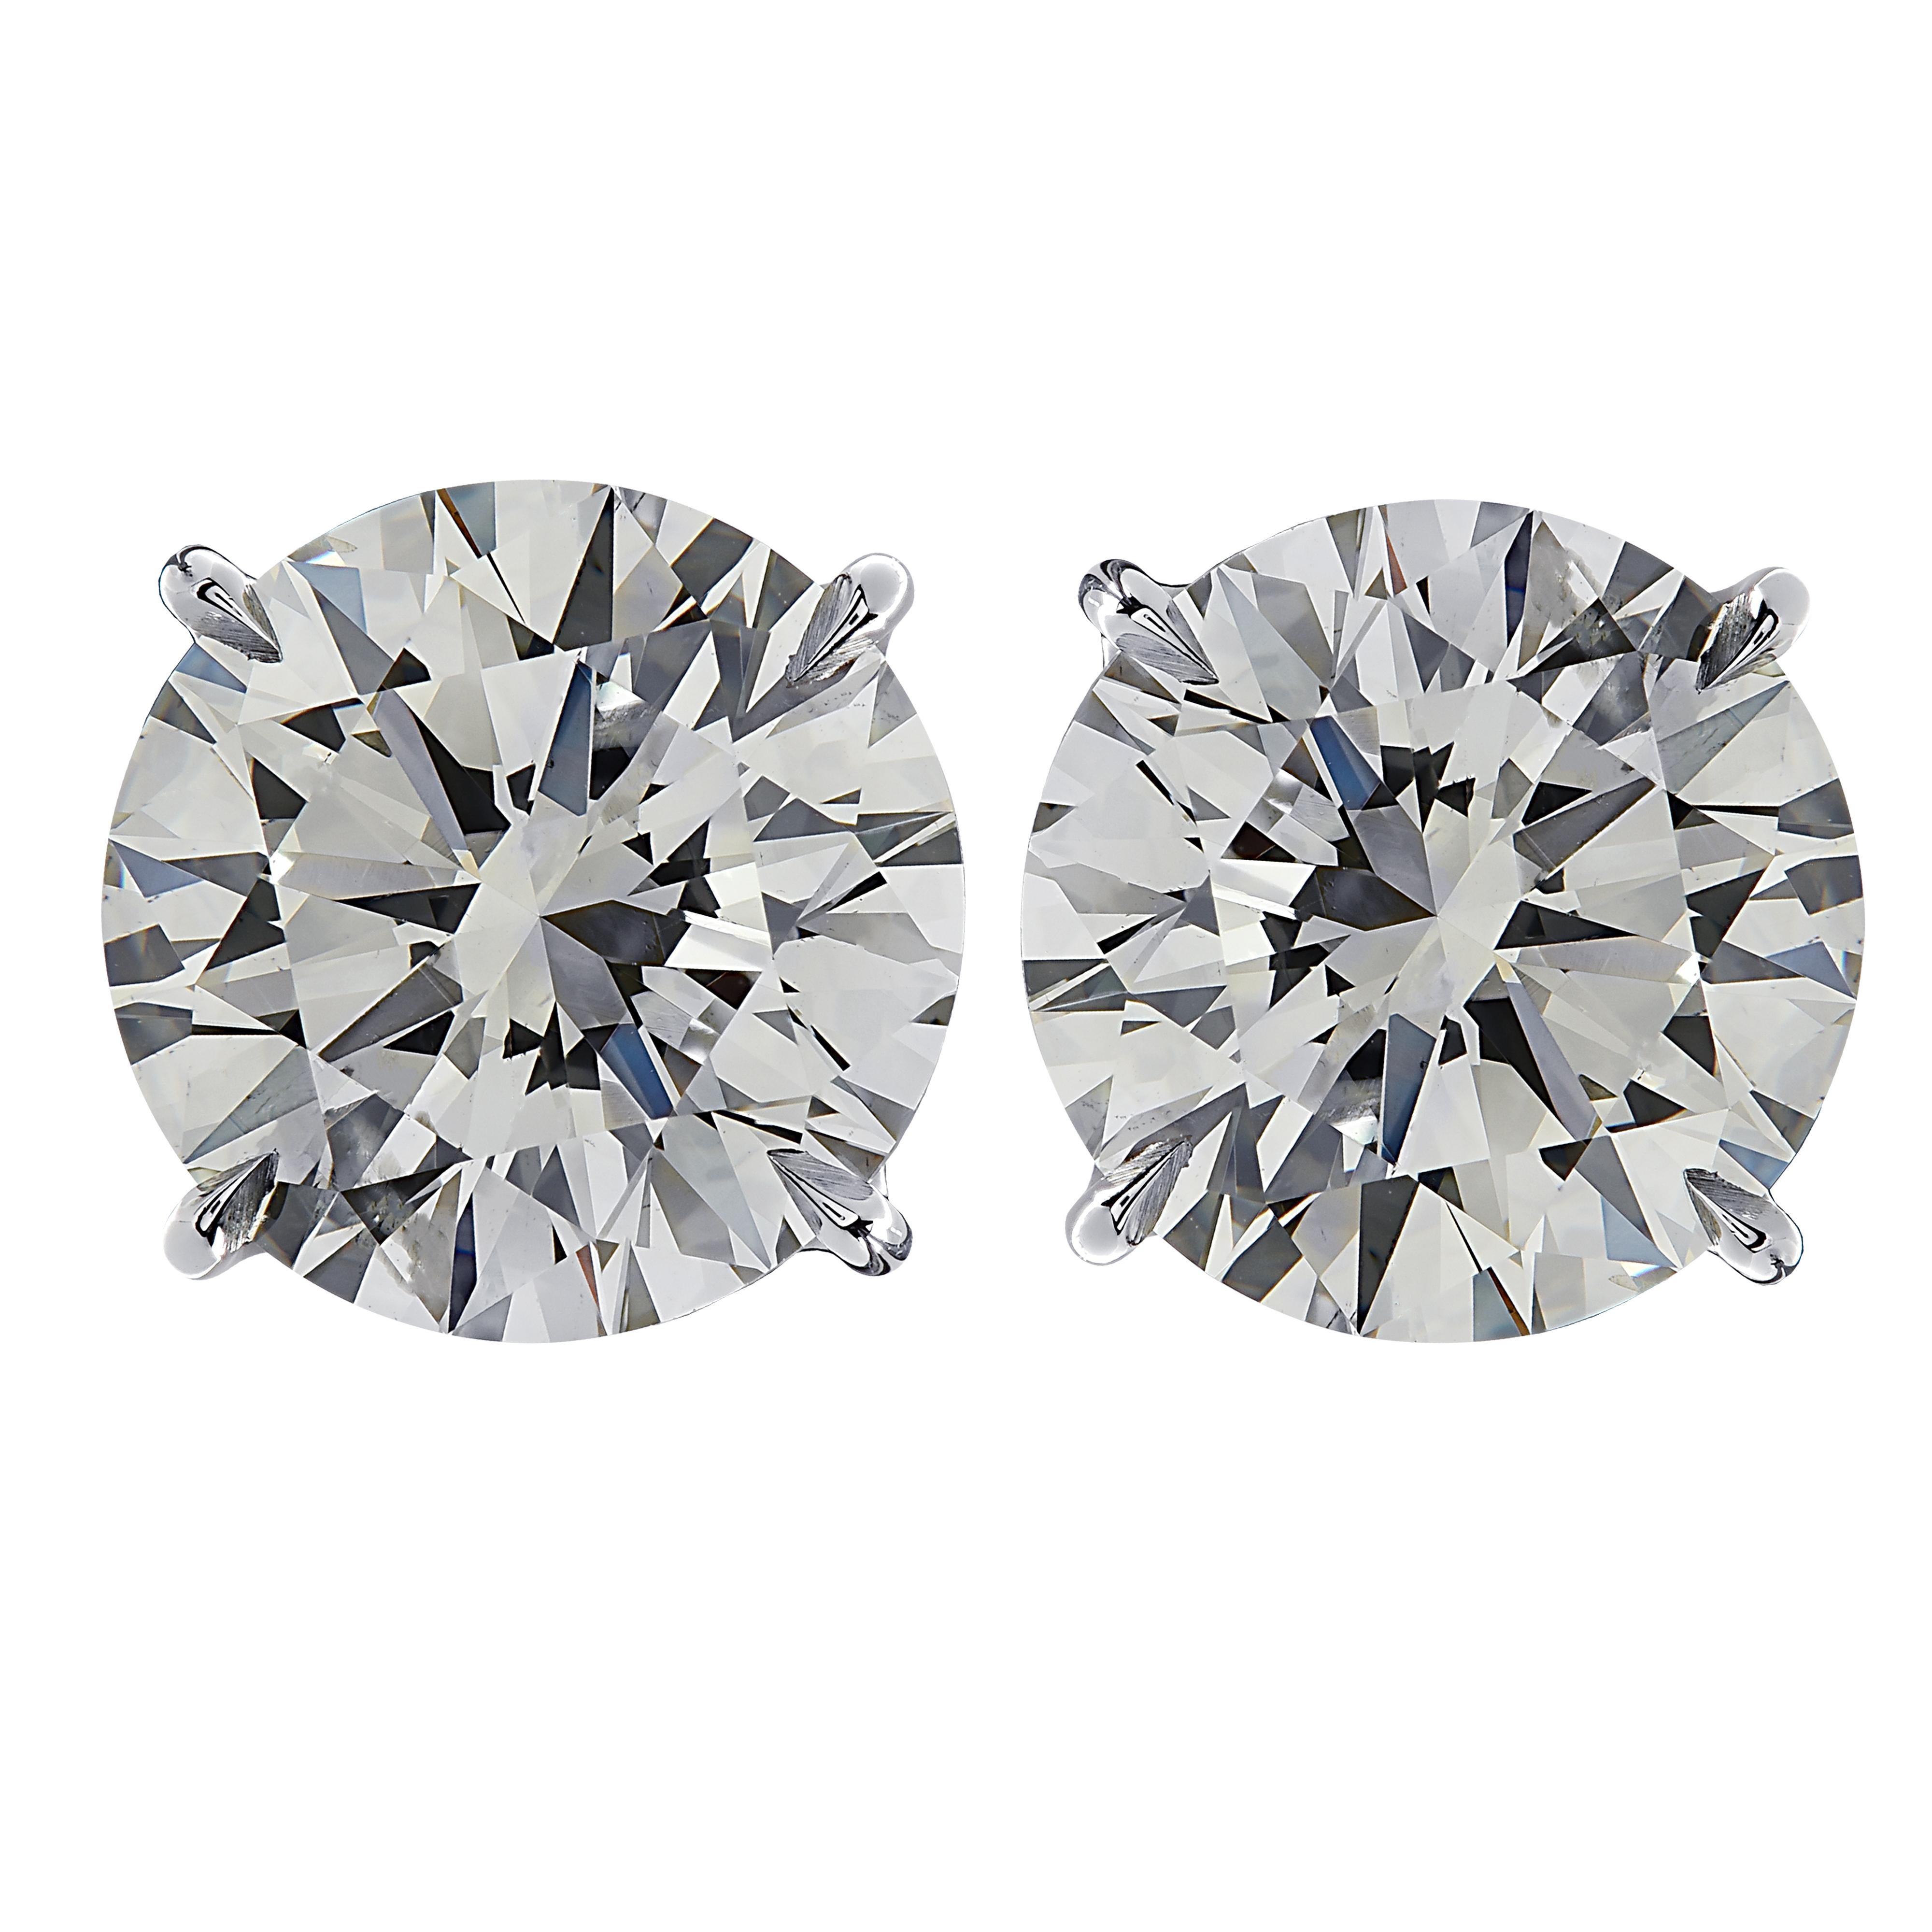 Stunning Vivid Diamonds solitaire stud earrings crafted by hand in platinum, showcasing 2 spectacular GIA Certified round brilliant cut diamonds weighing 3.00 carats total, j color SI2 clarity with excellent polish, cut and symmetry grades. These